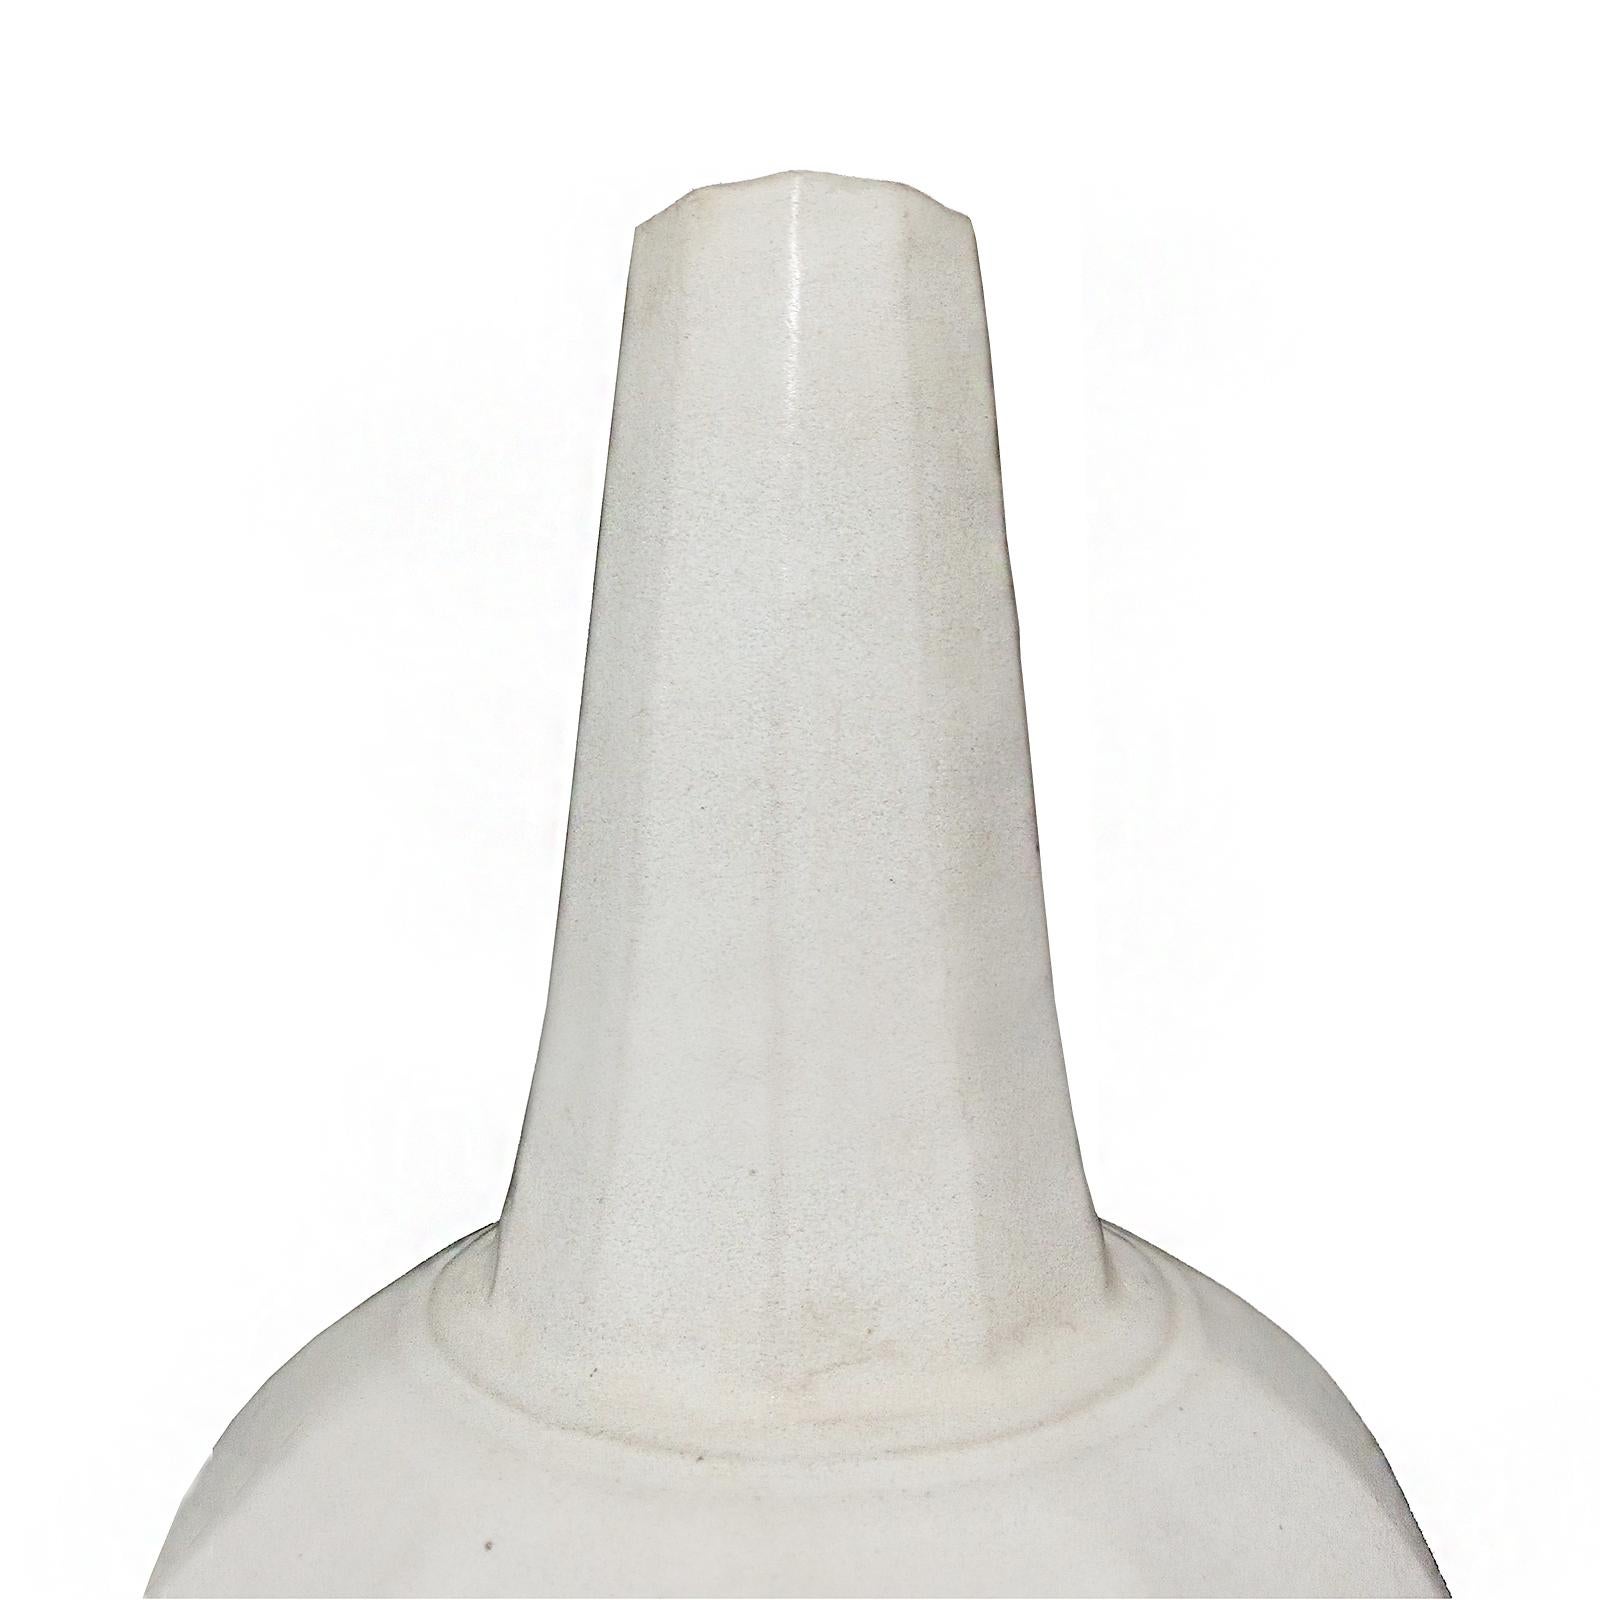 Late 20th Century Thai Ceramic Vase with White Glaze, Contemporary For Sale